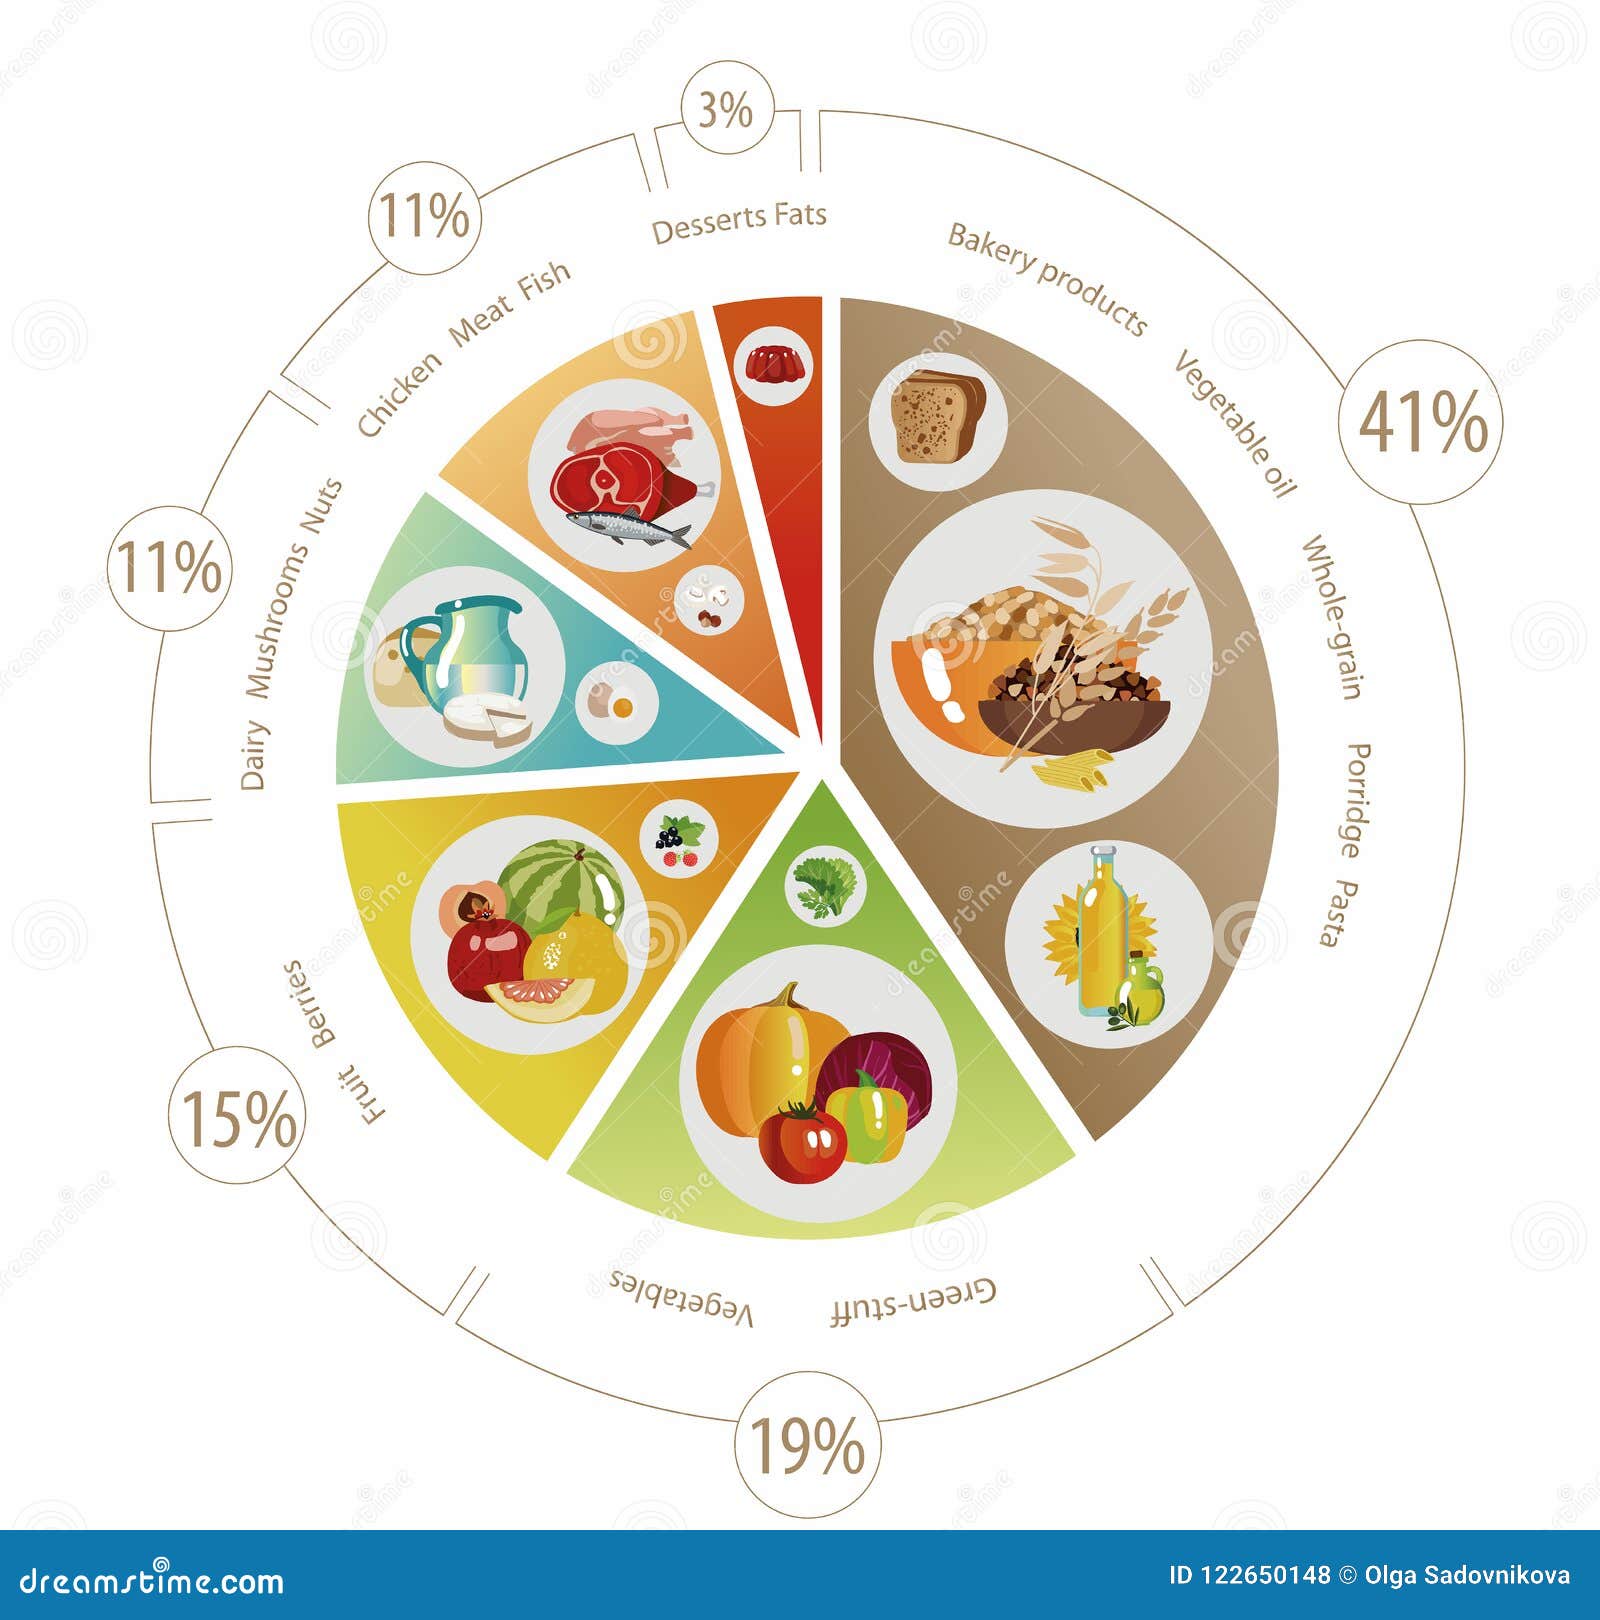 Food Groups Pie Chart